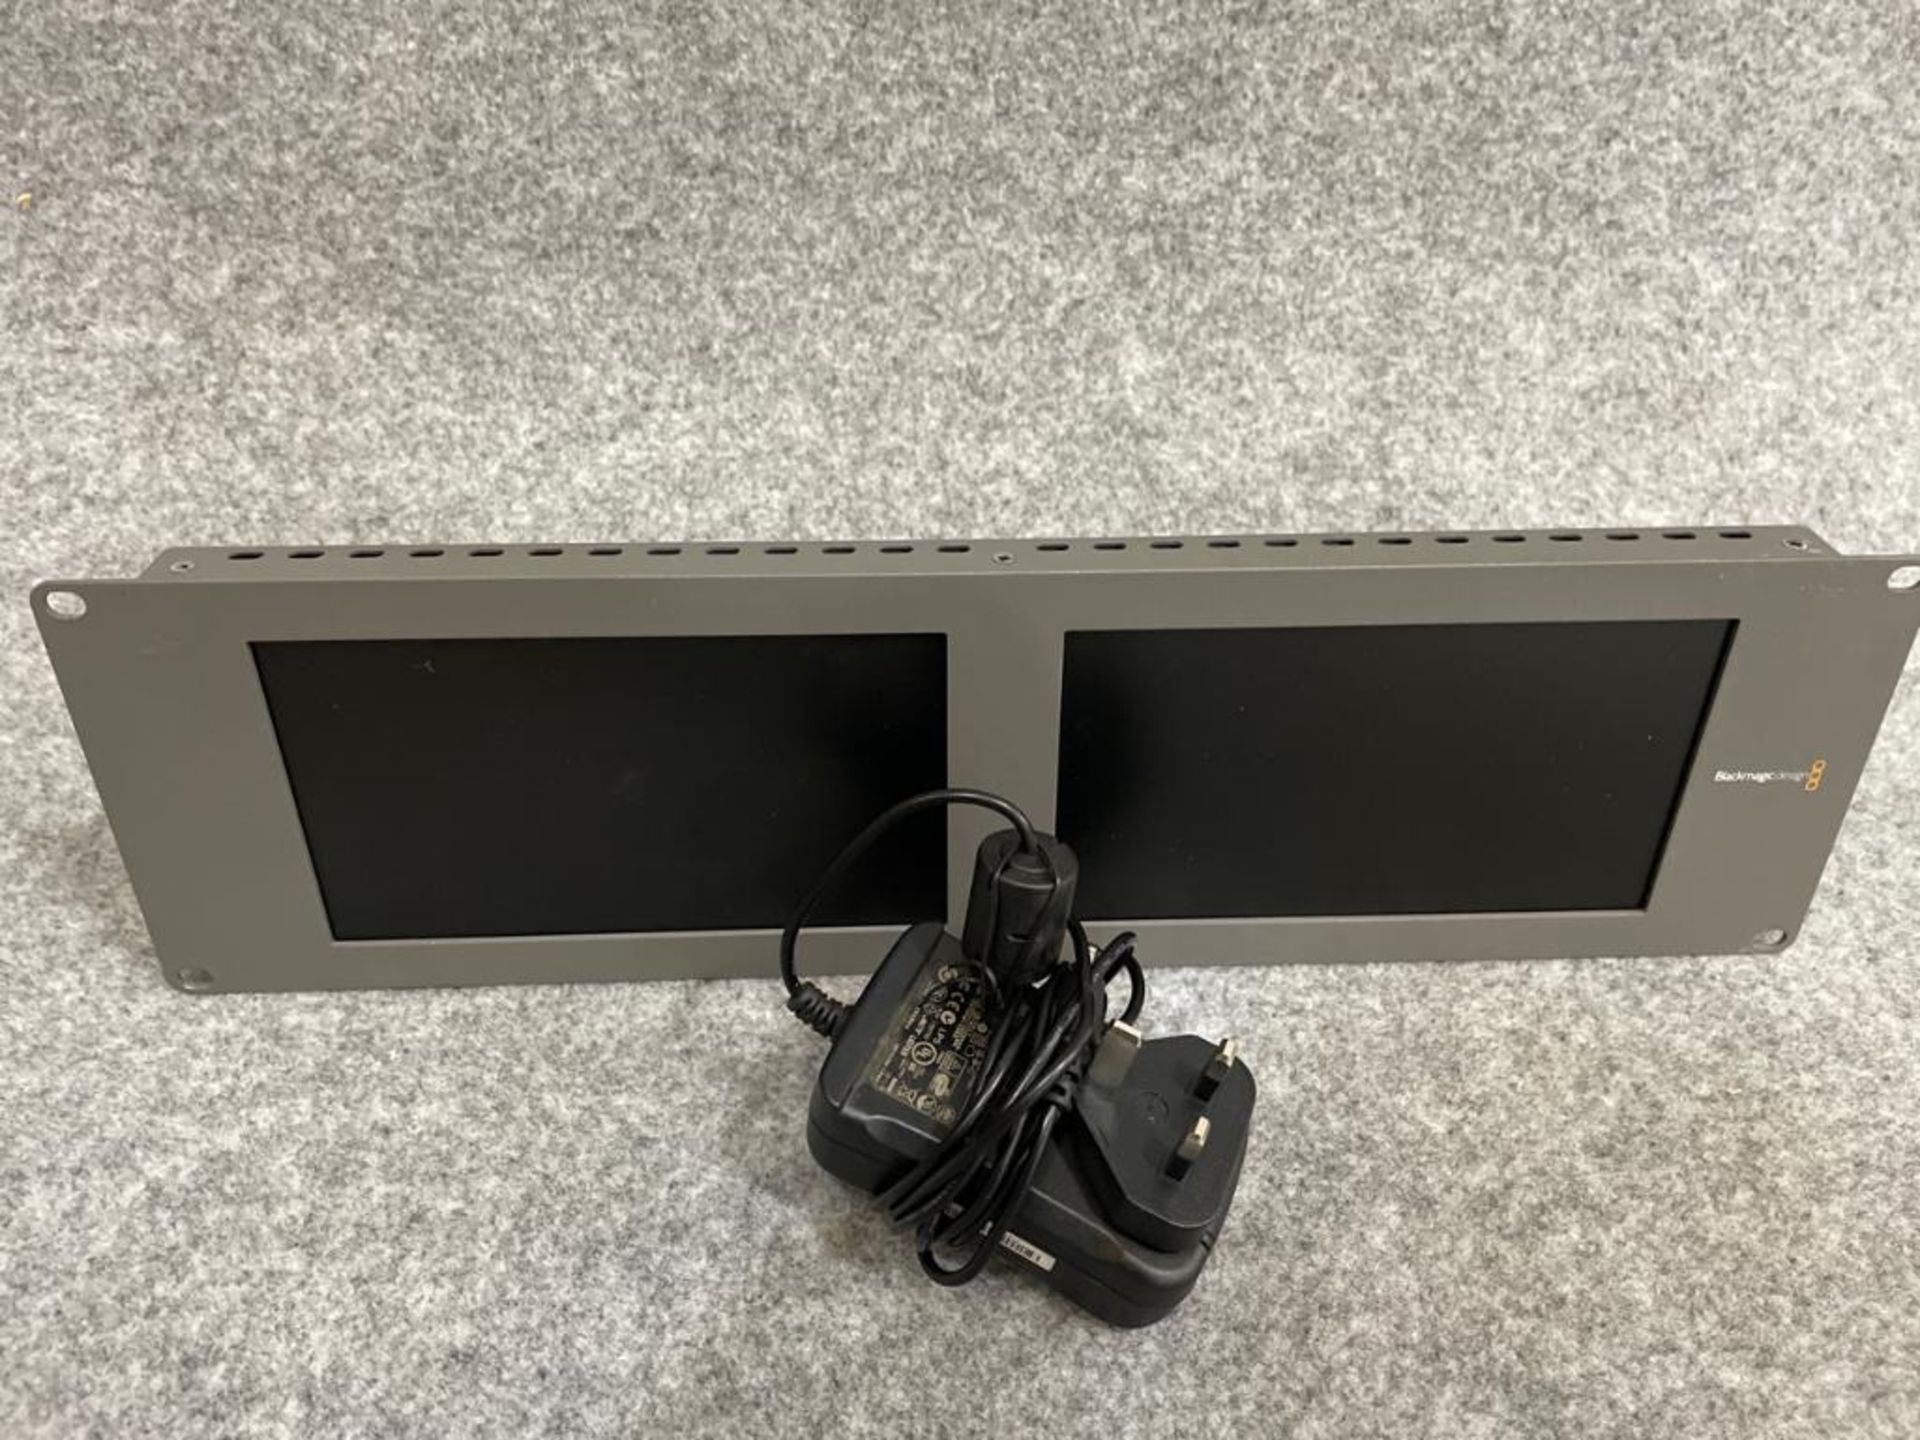 BlackMagic Dual HD Monitor with power supply SN: 1349840 - Image 3 of 3